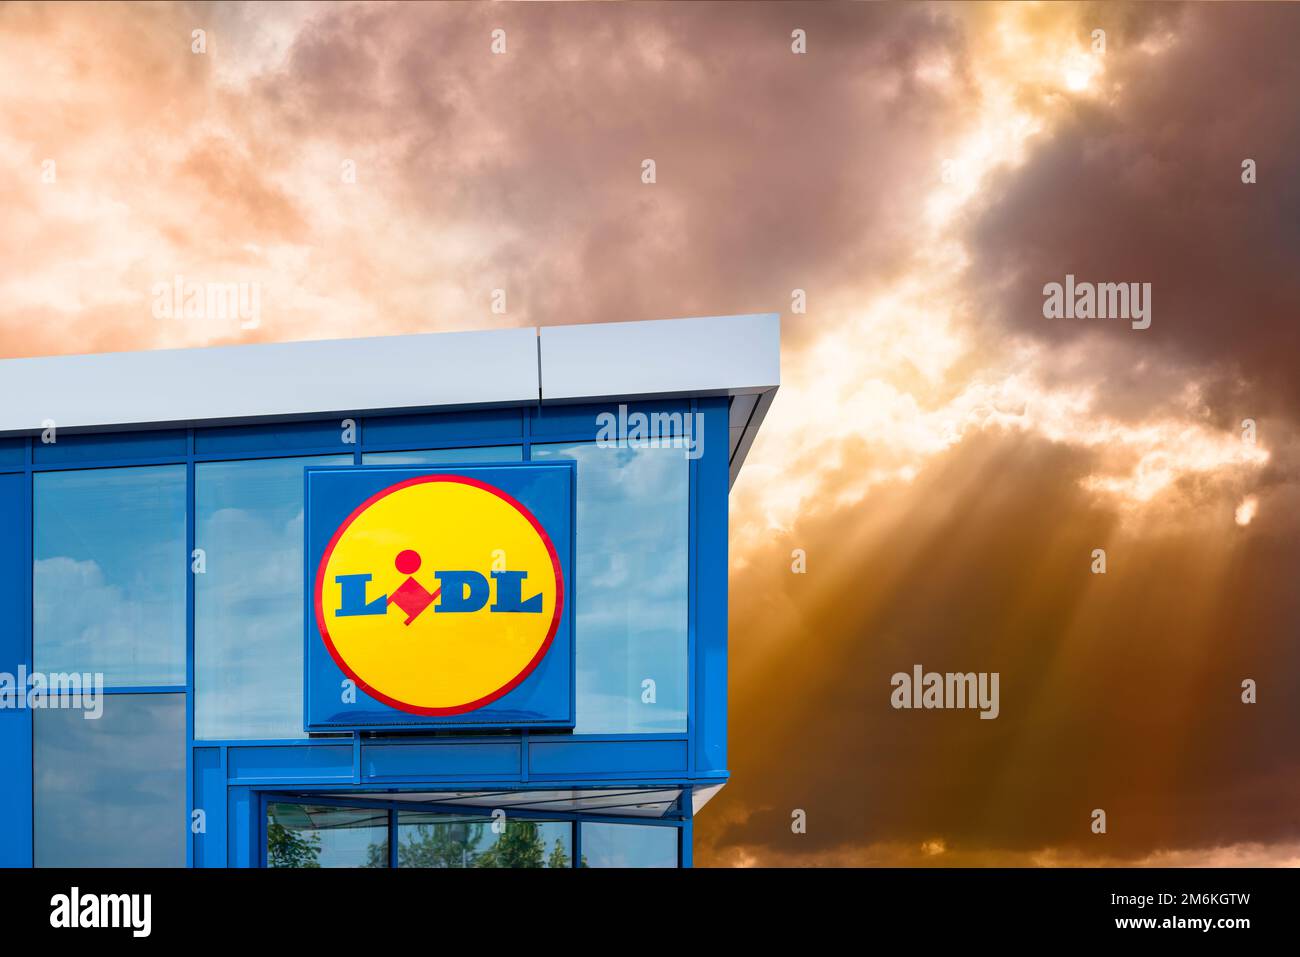 taal Overtreffen Afstotend Company logo of the discounter Lidl Stock Photo - Alamy